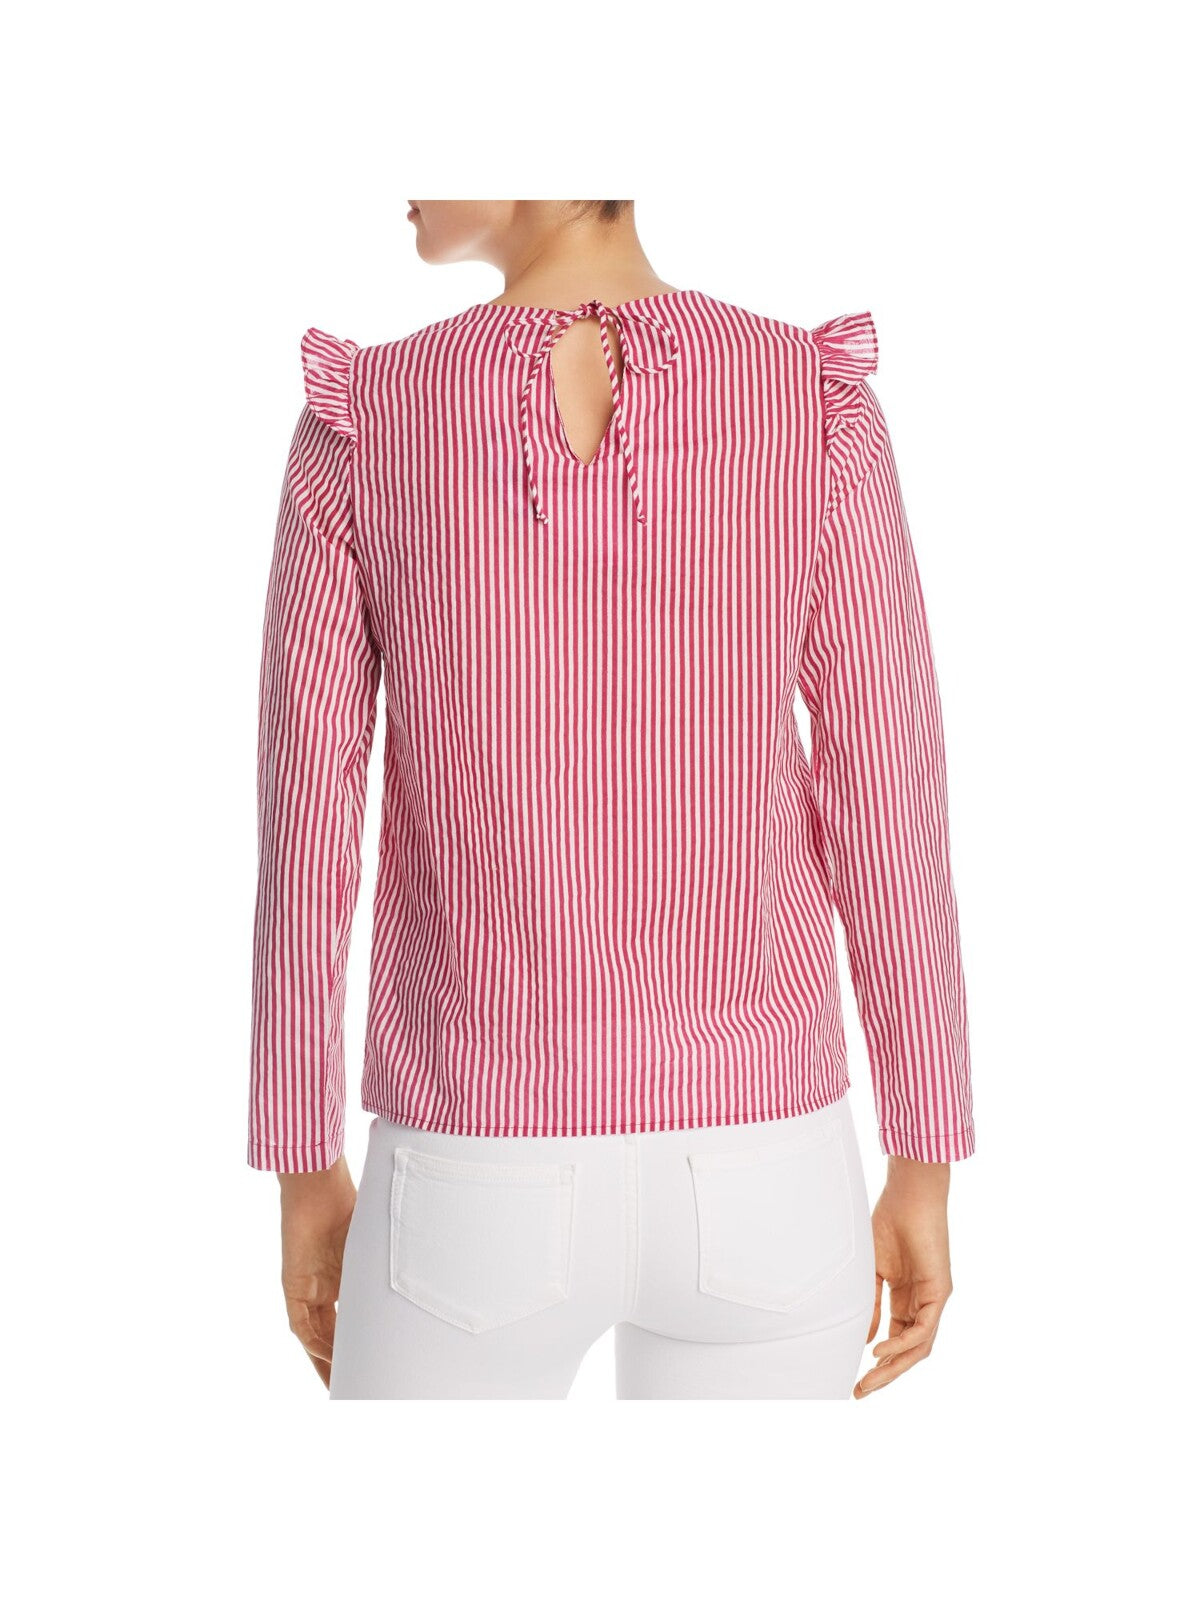 VERO MODA Womens Pink Ruffled Tie Back Cut Out Striped Long Sleeve Crew Neck Wear To Work Top M